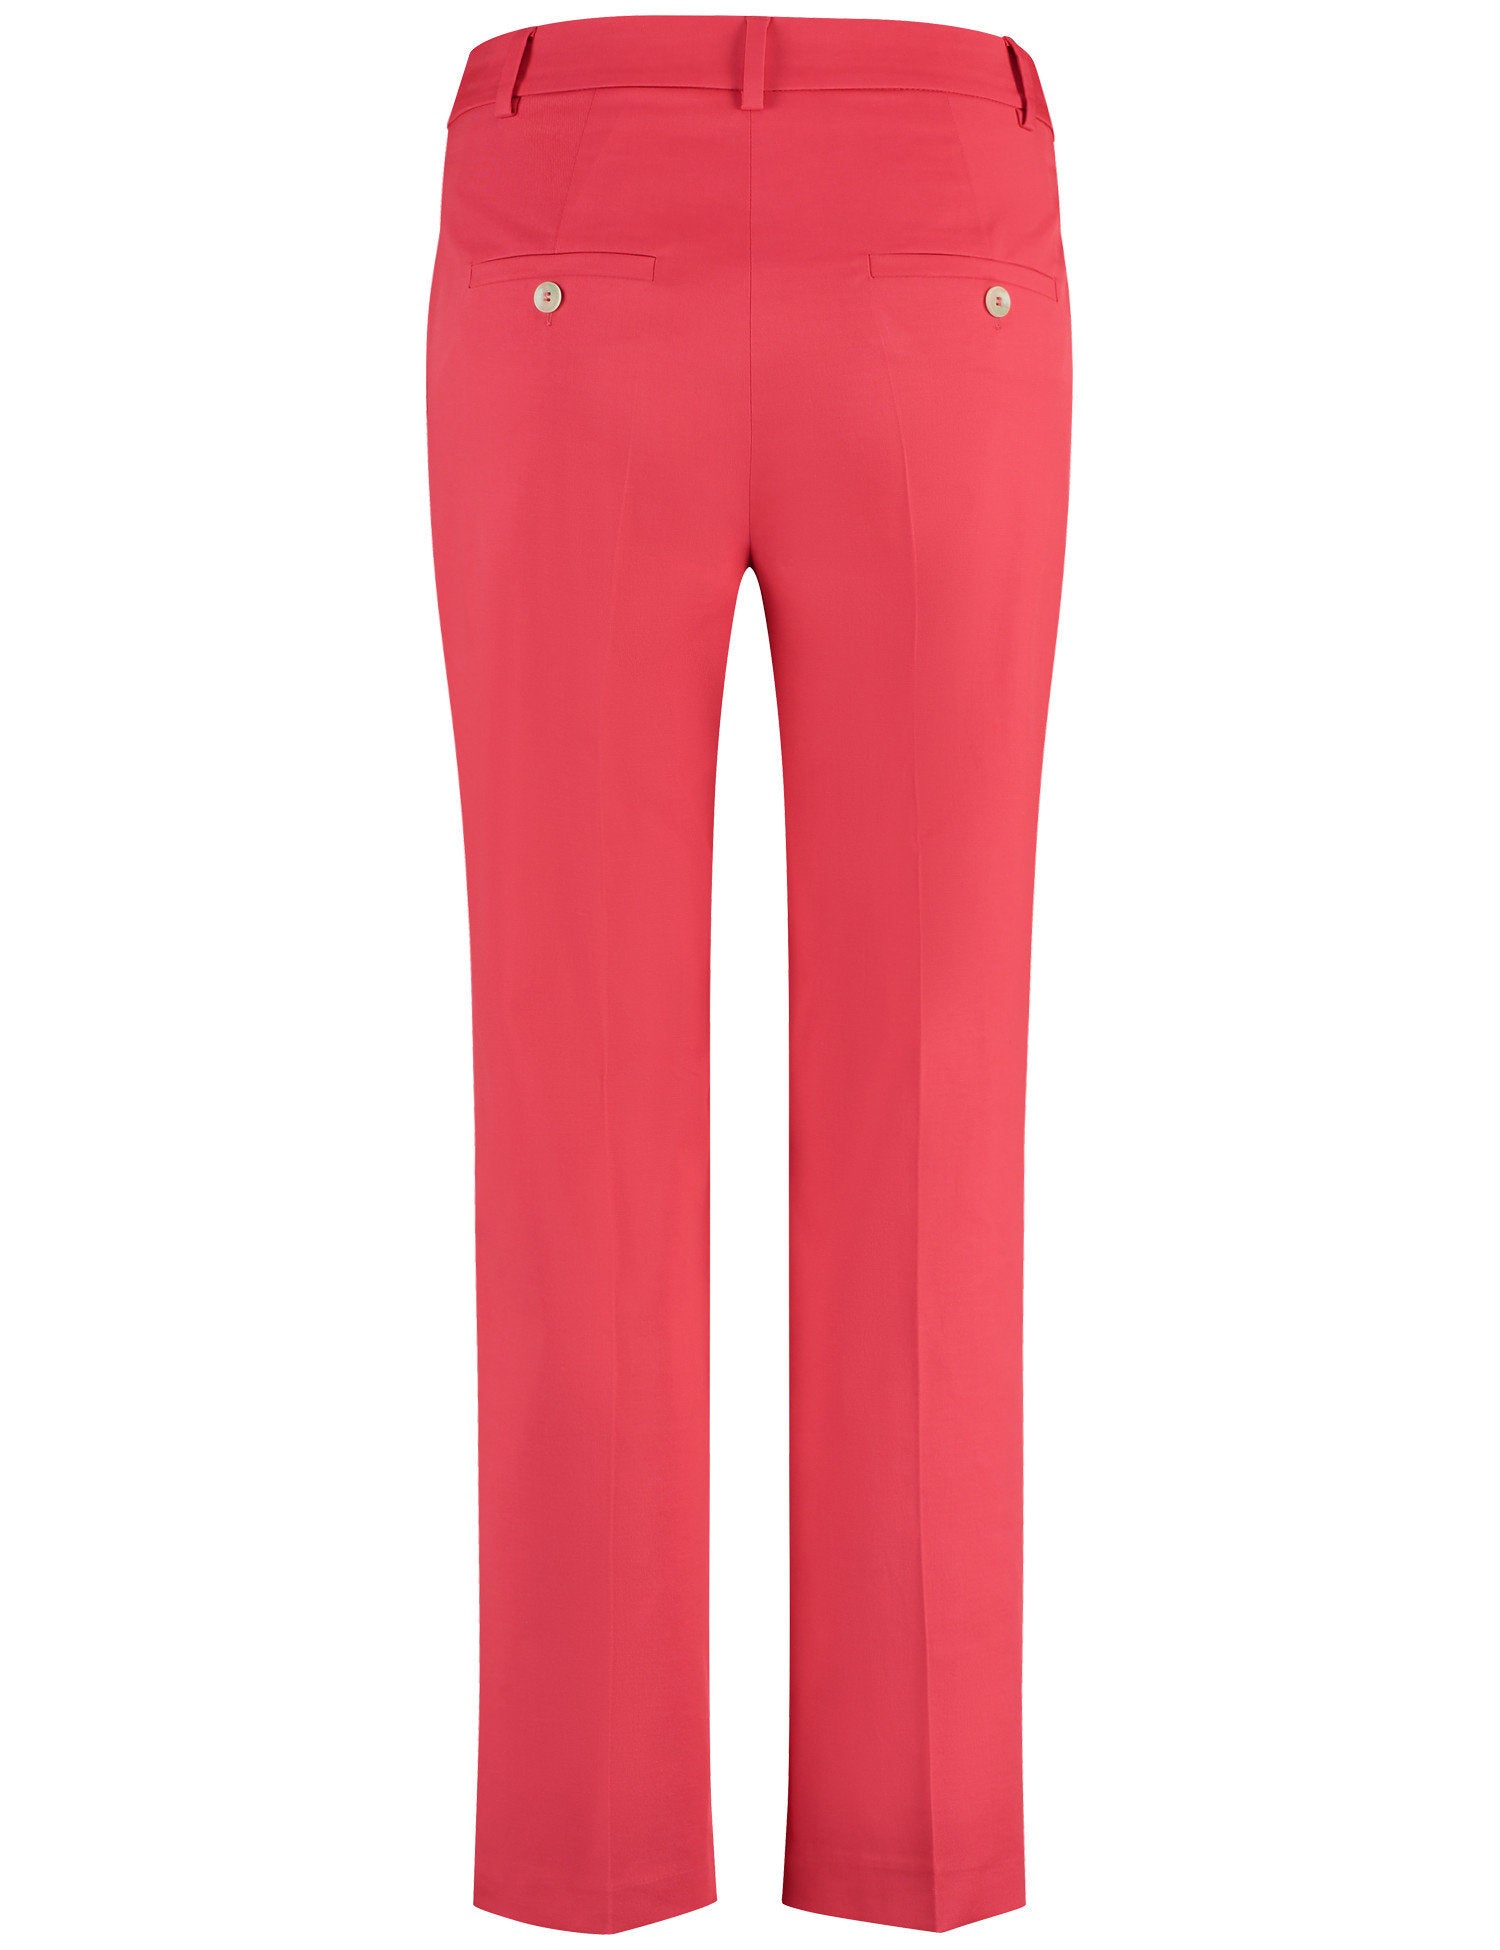 Elegant Trousers With Pressed Pleats_320003-31332_60140_03